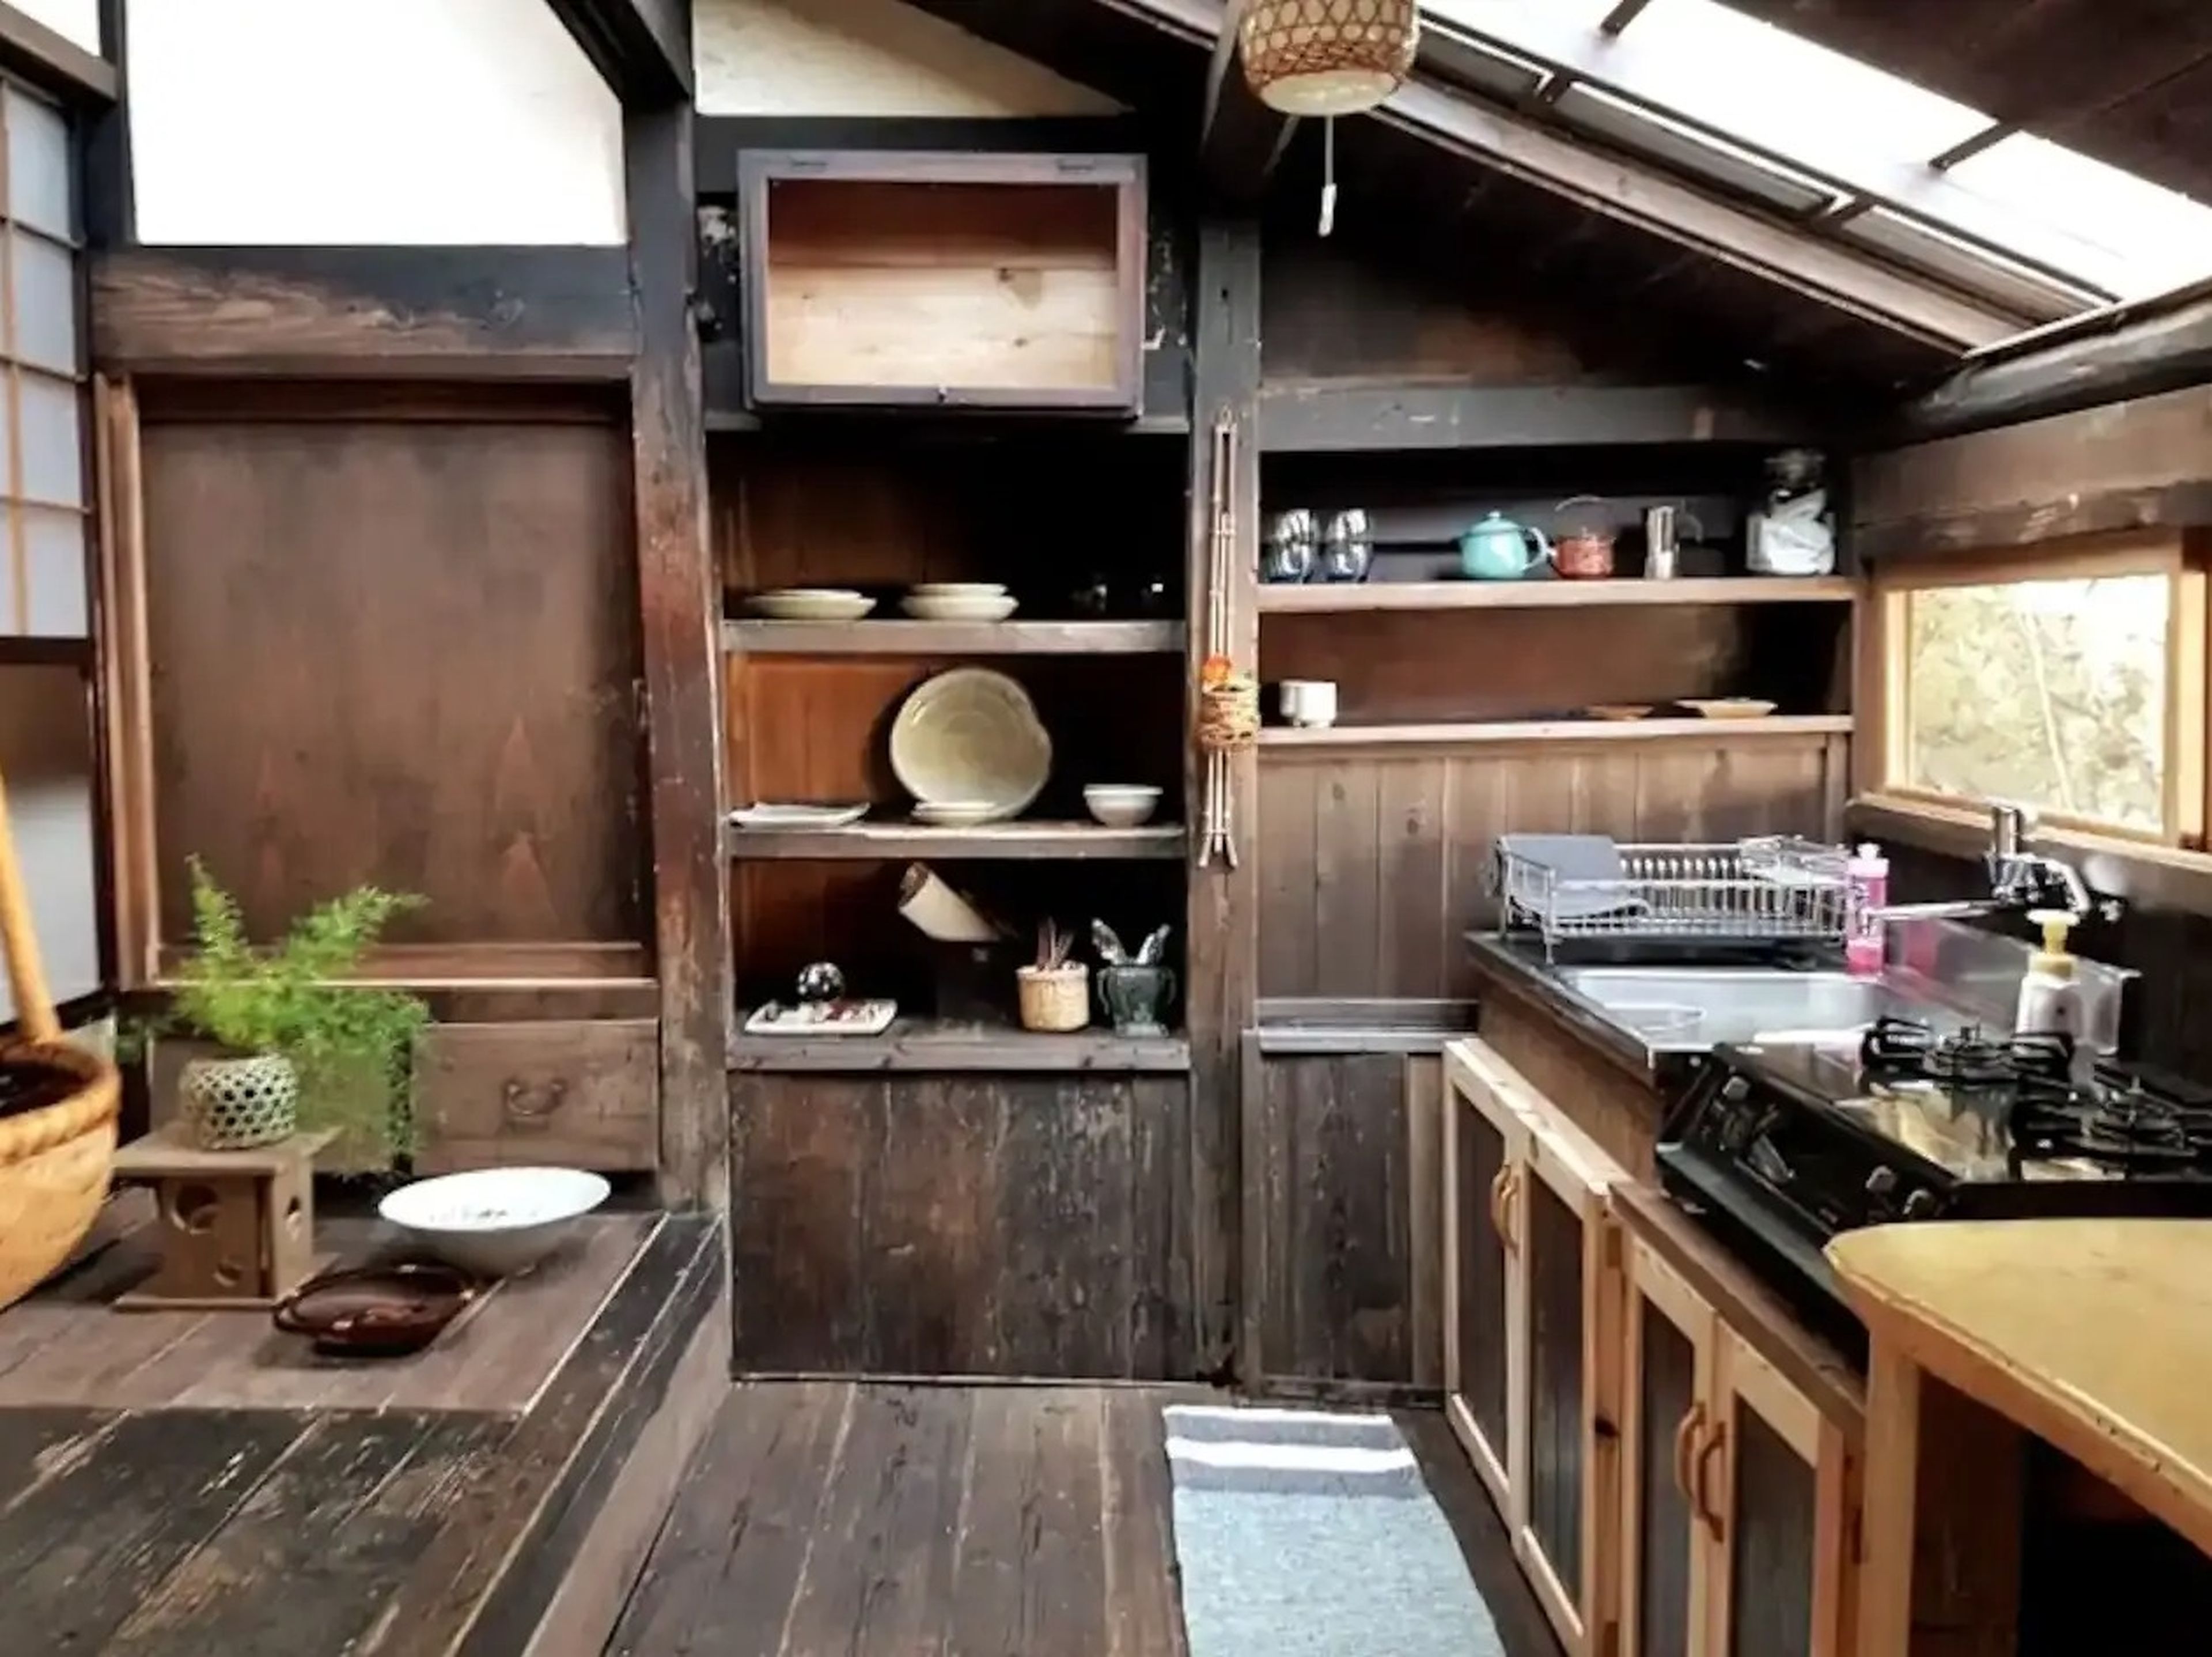 The kitchen of the restored ryokan.